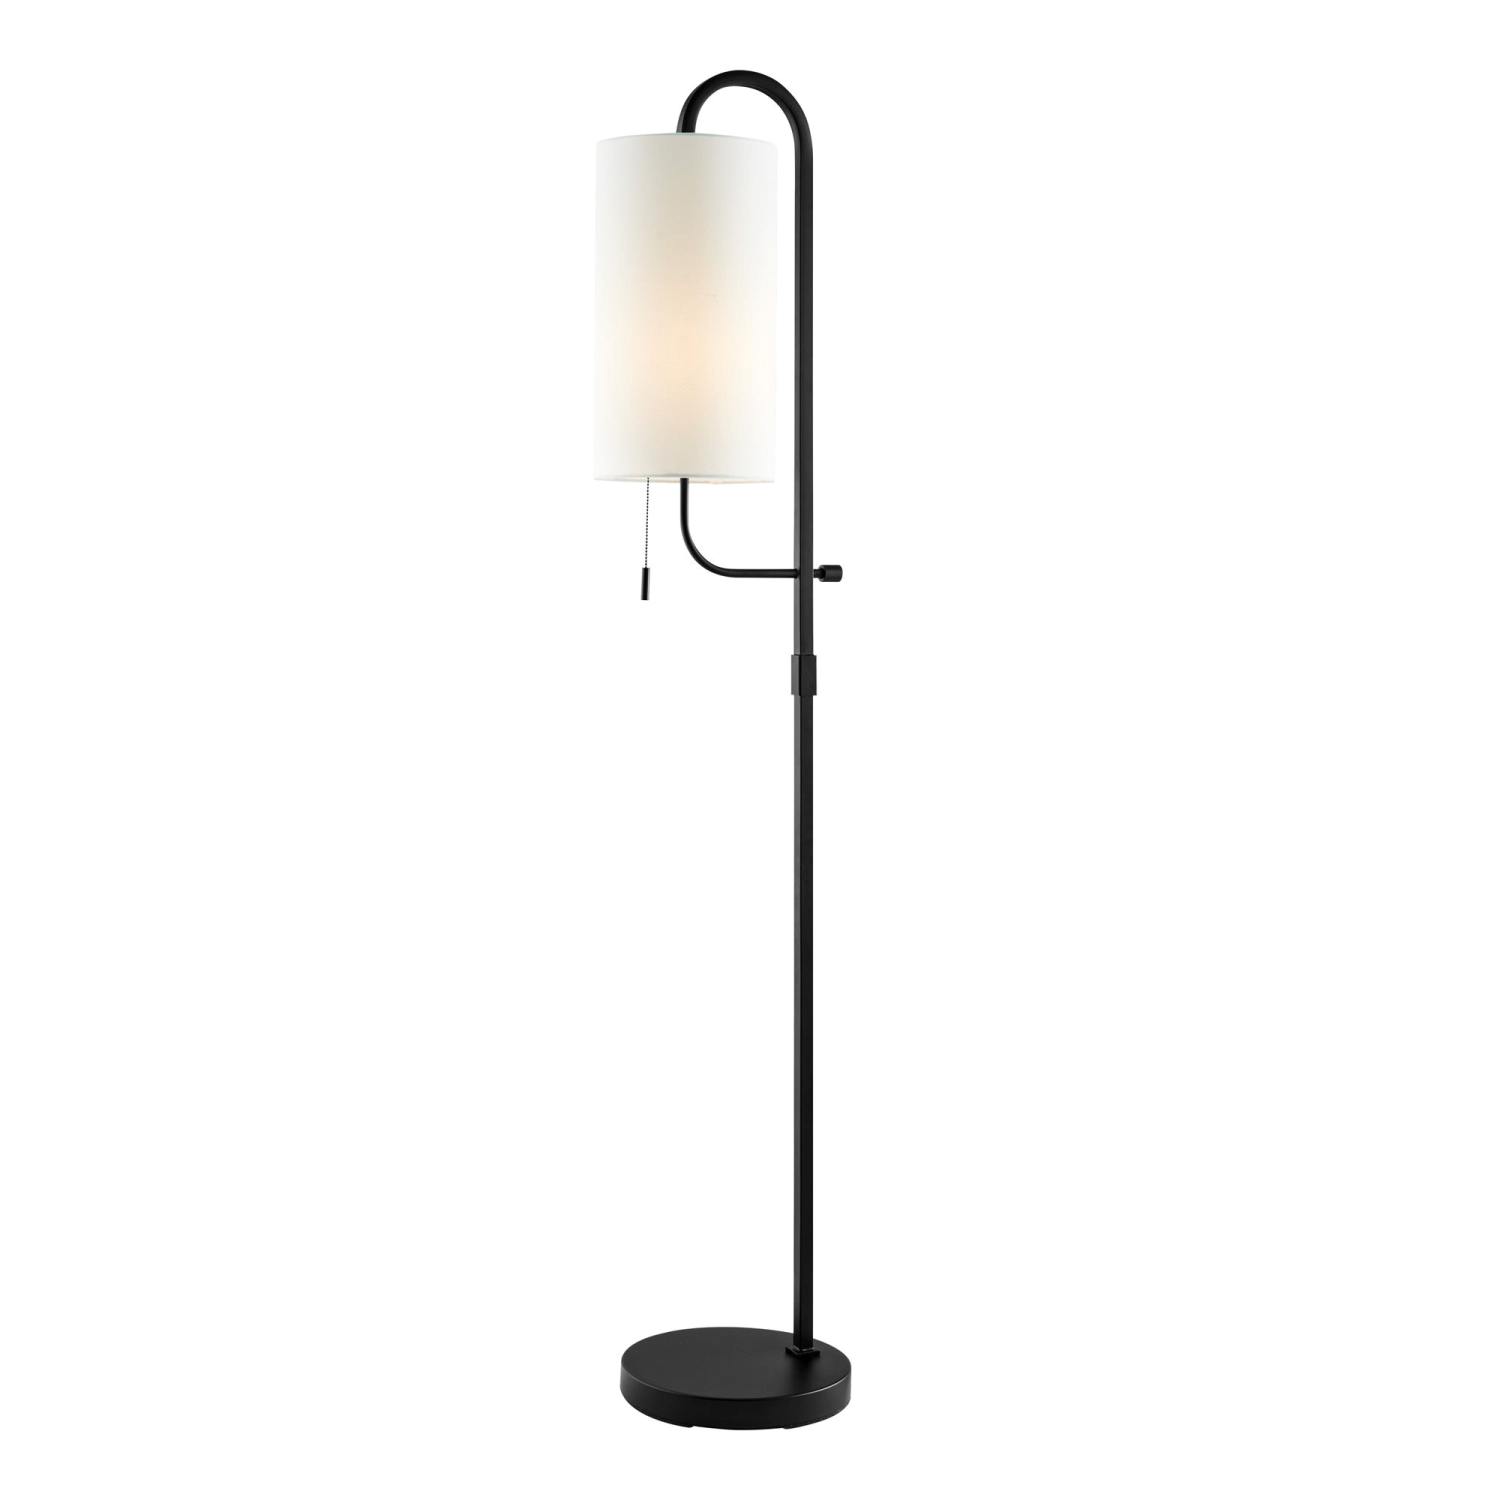 Xandra Floor Lamp Picture with White Background